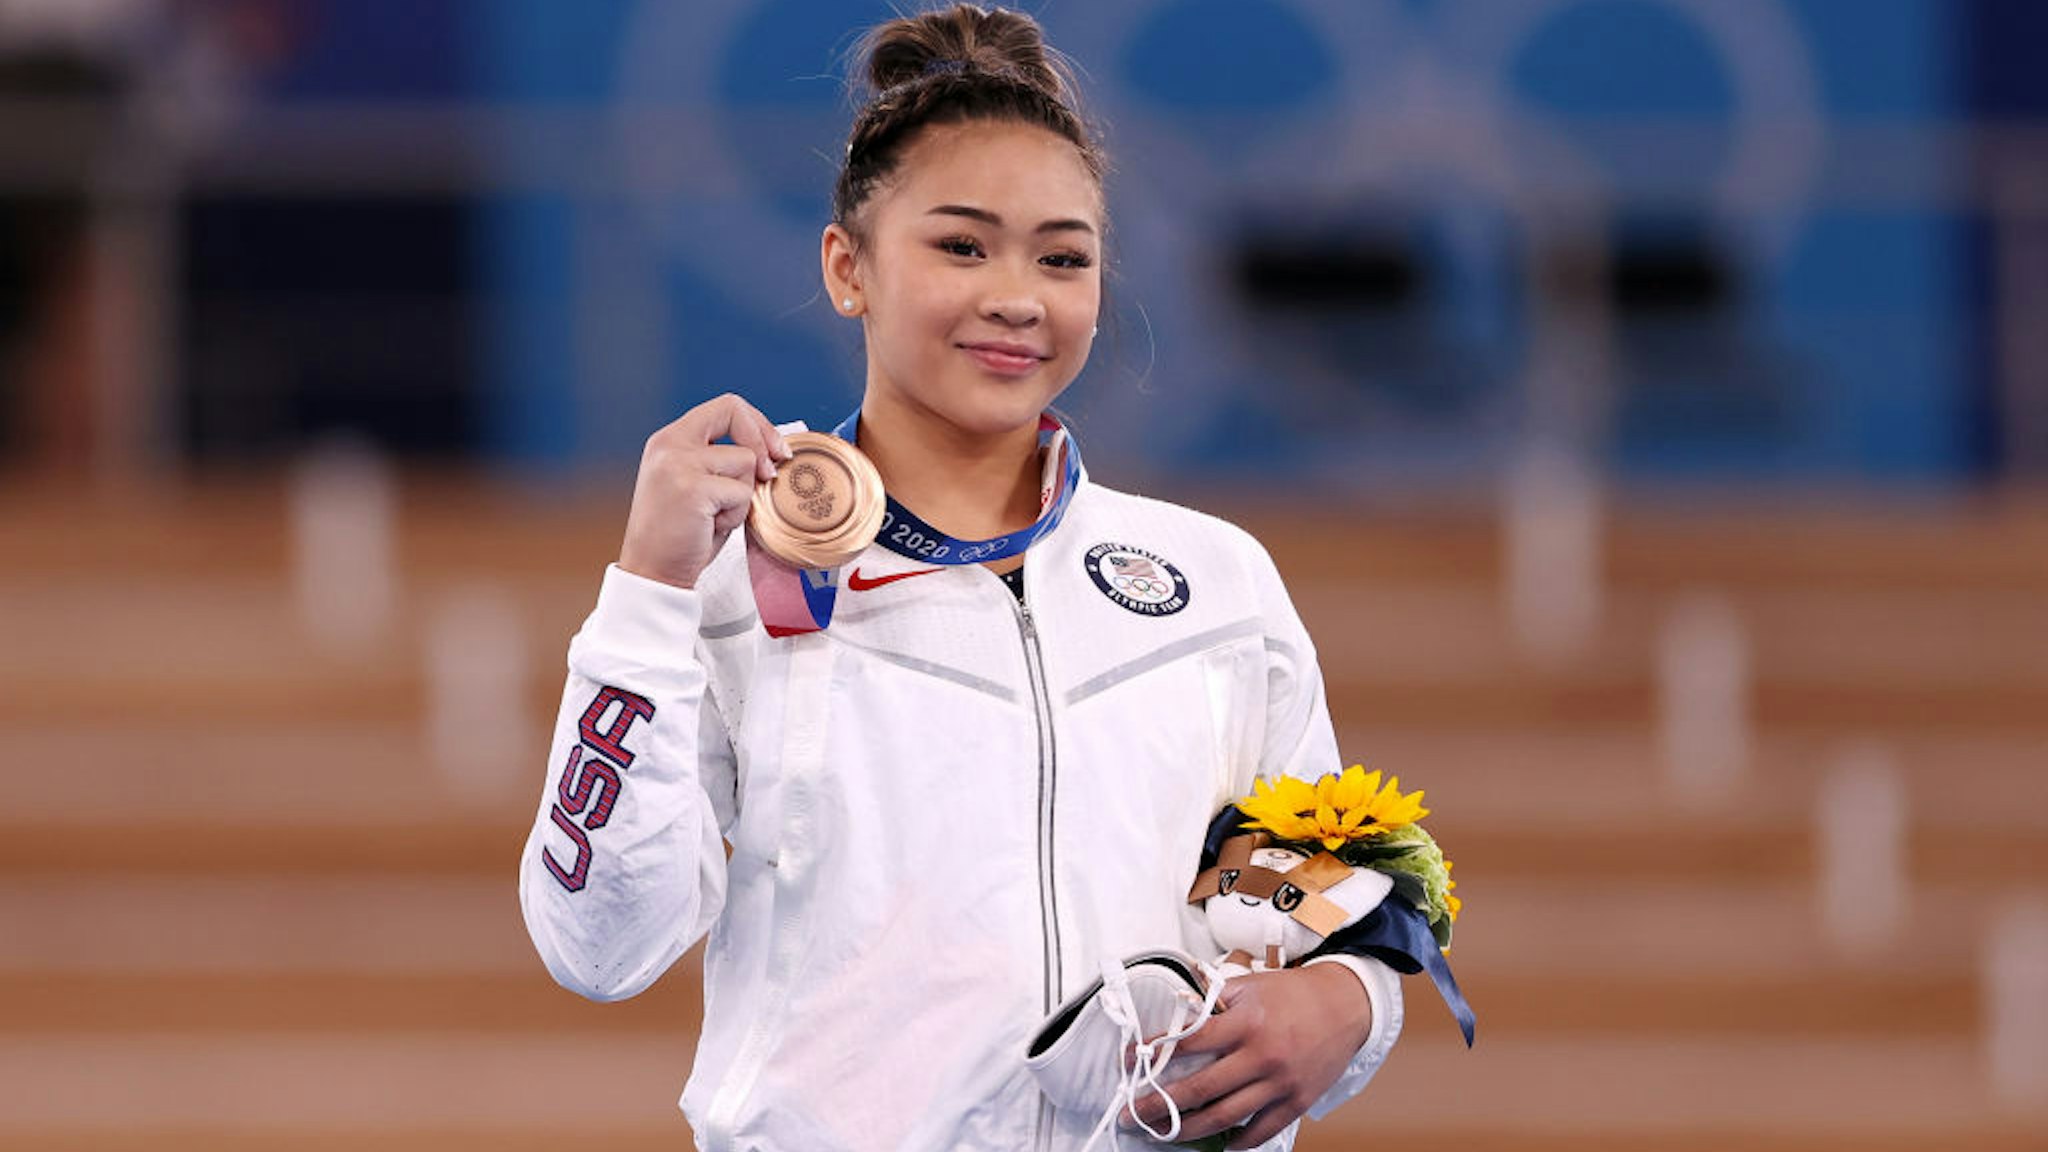 TOKYO, JAPAN - AUGUST 01: Bronze Medalist Sunisa Lee of Team United States poses with her medal on the podium during the Women's Uneven Bars Final medal ceremony on day nine of the Tokyo 2020 Olympic Games at Ariake Gymnastics Centre on August 01, 2021 in Tokyo, Japan. (Photo by Laurence Griffiths/Getty Images)